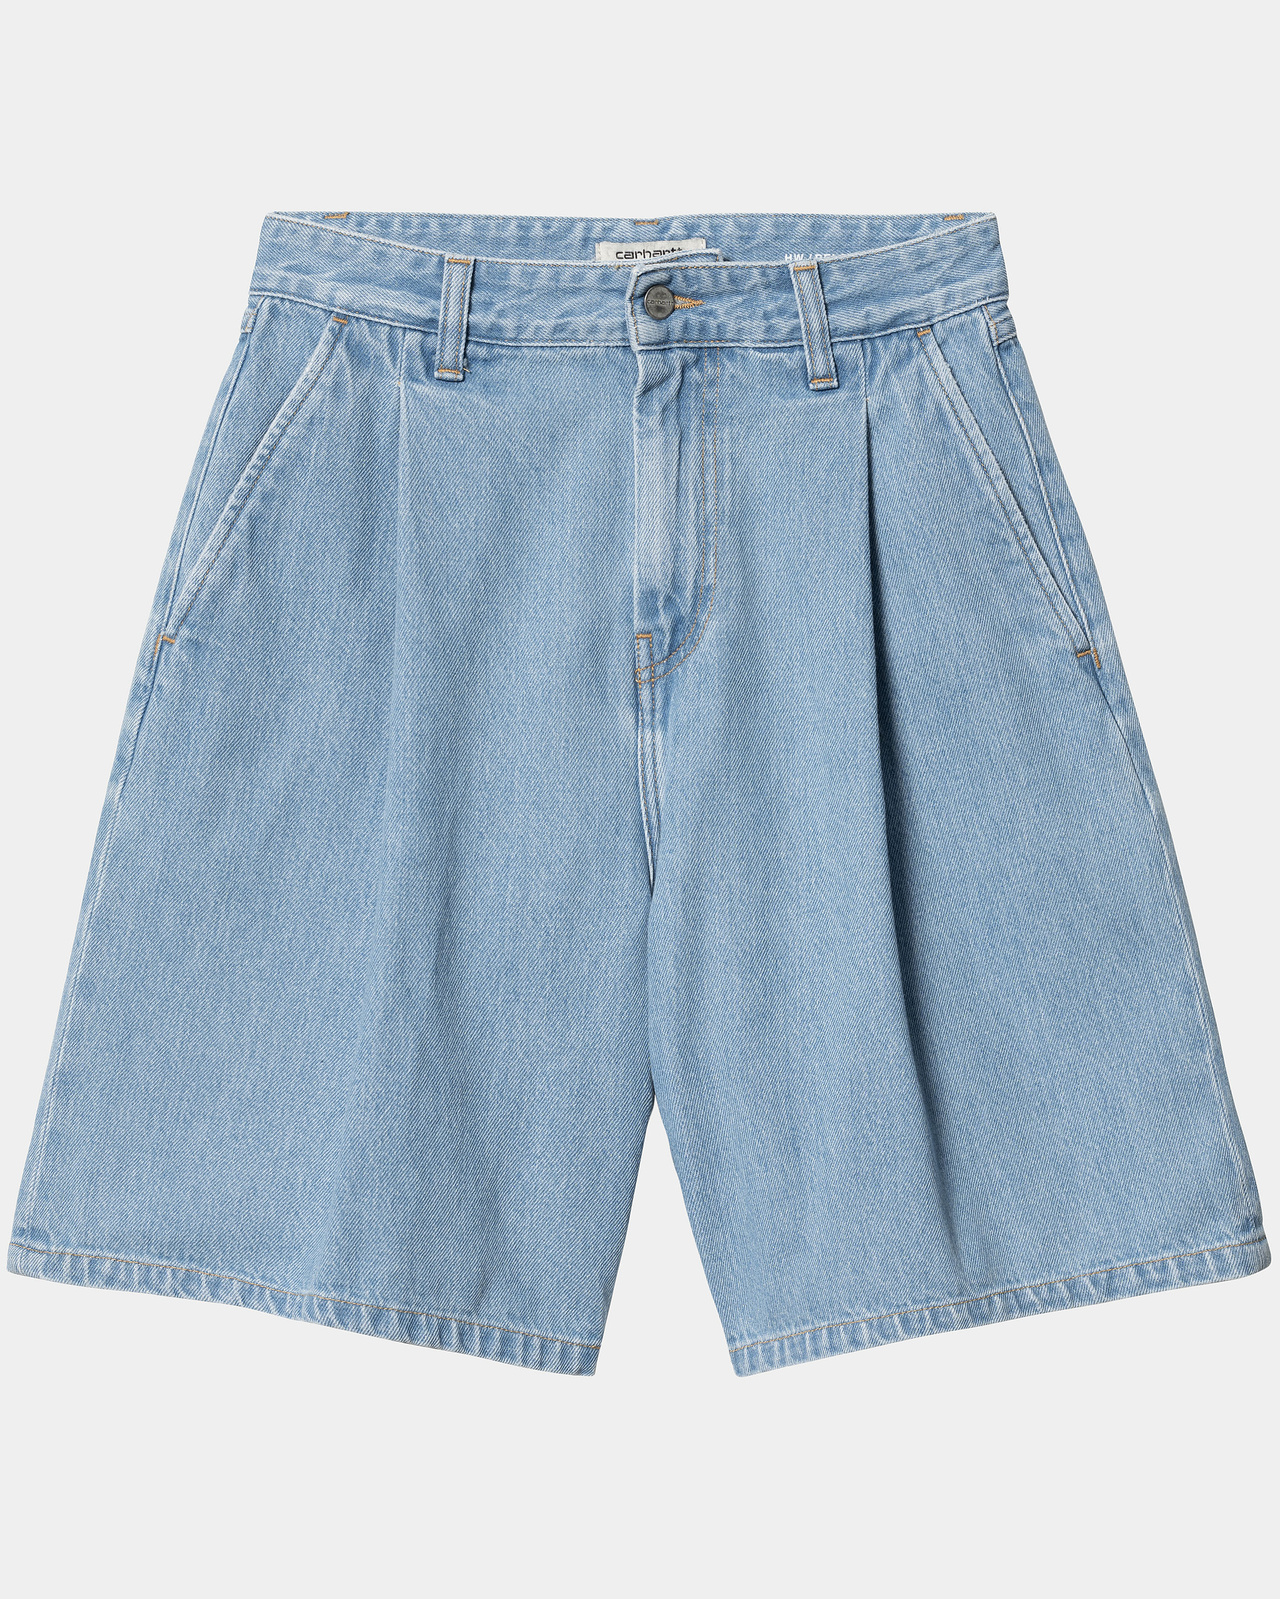 Shorts Alta W´s - Blue Stone Bleached - XS